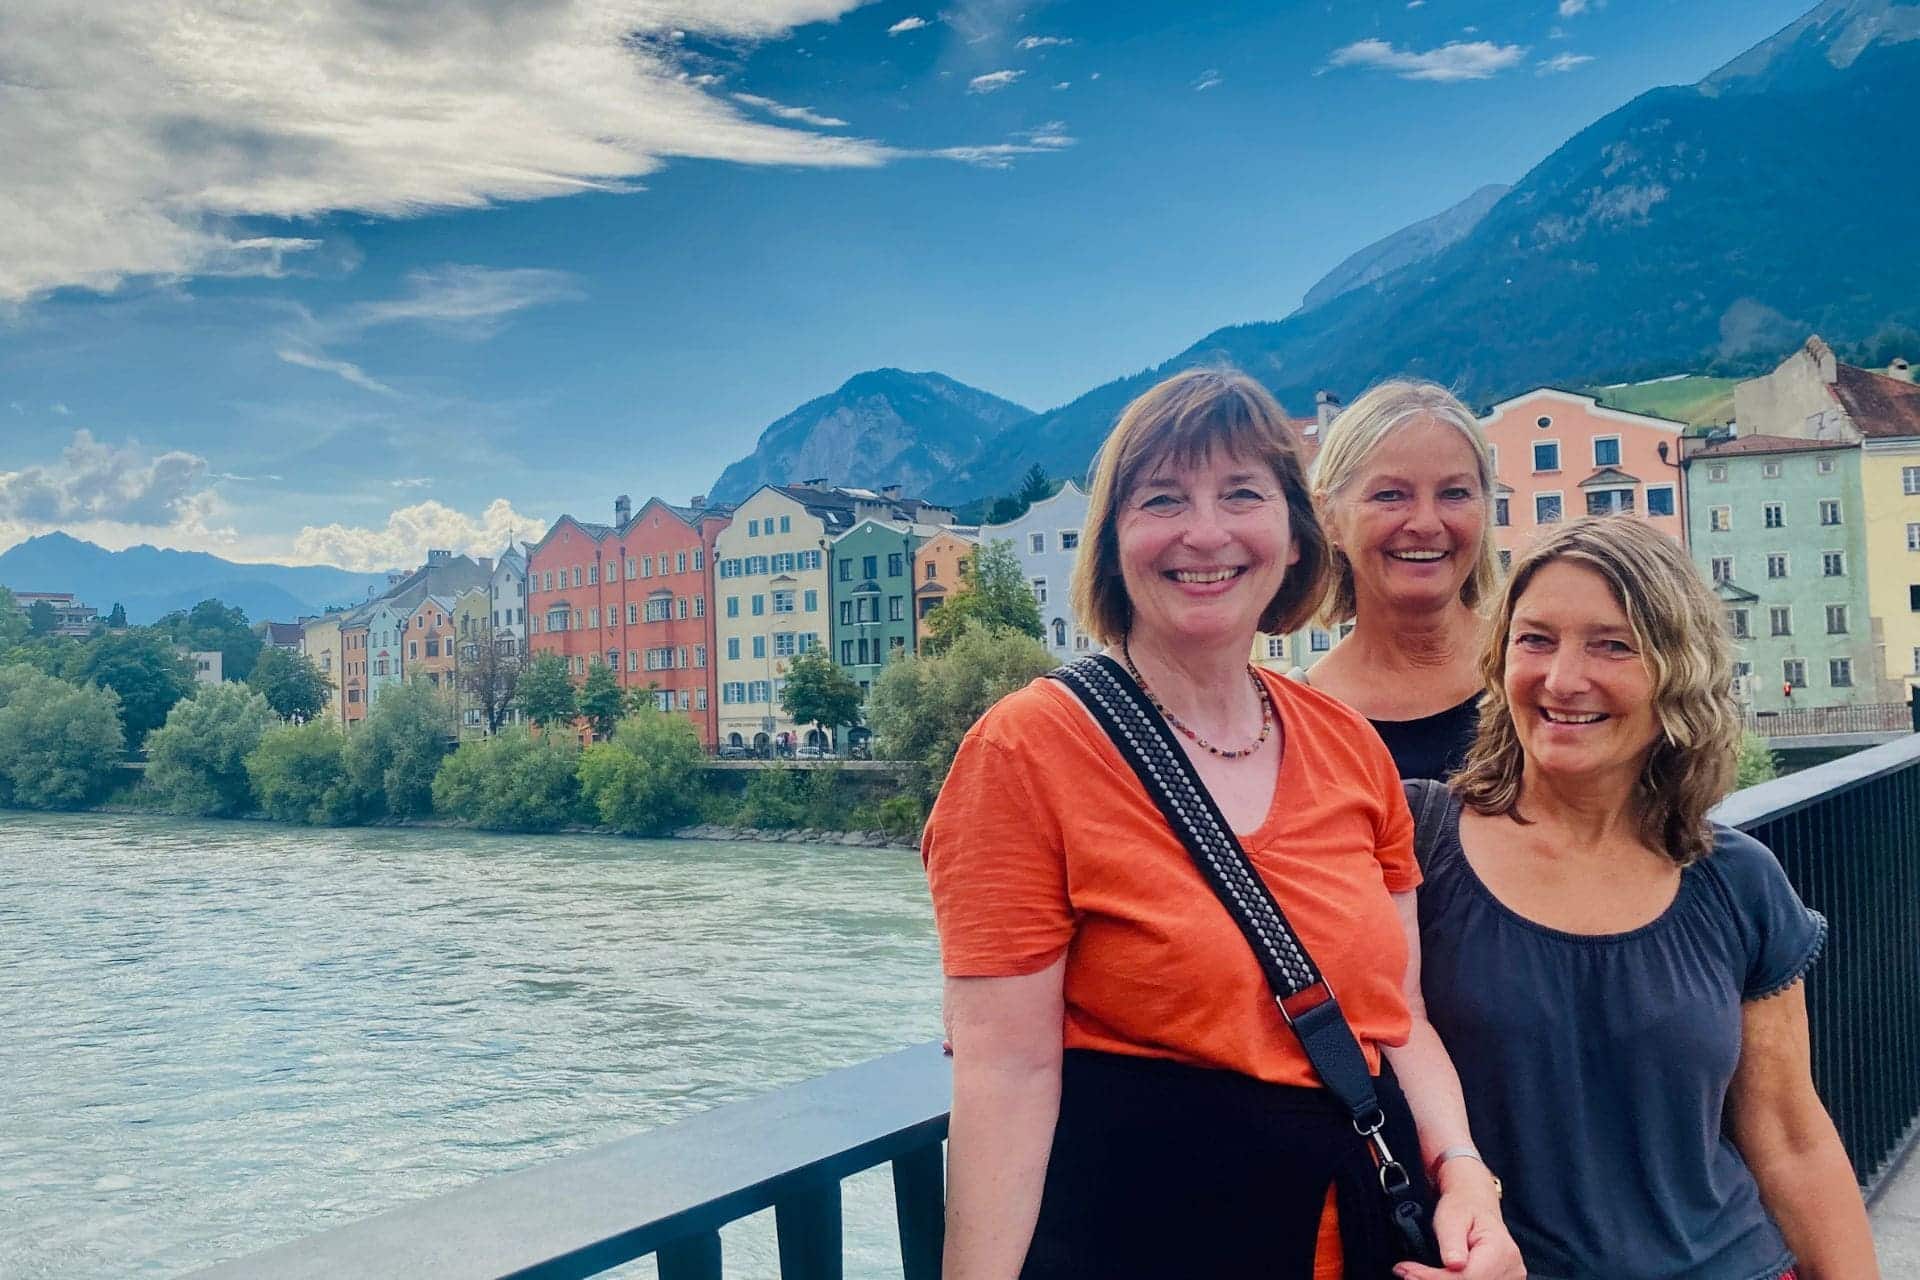 Innsbruck Inn Bridge: Three laughing women against the background of the colorful row of houses in Mariahilfstraße - angiestravelroutes.com